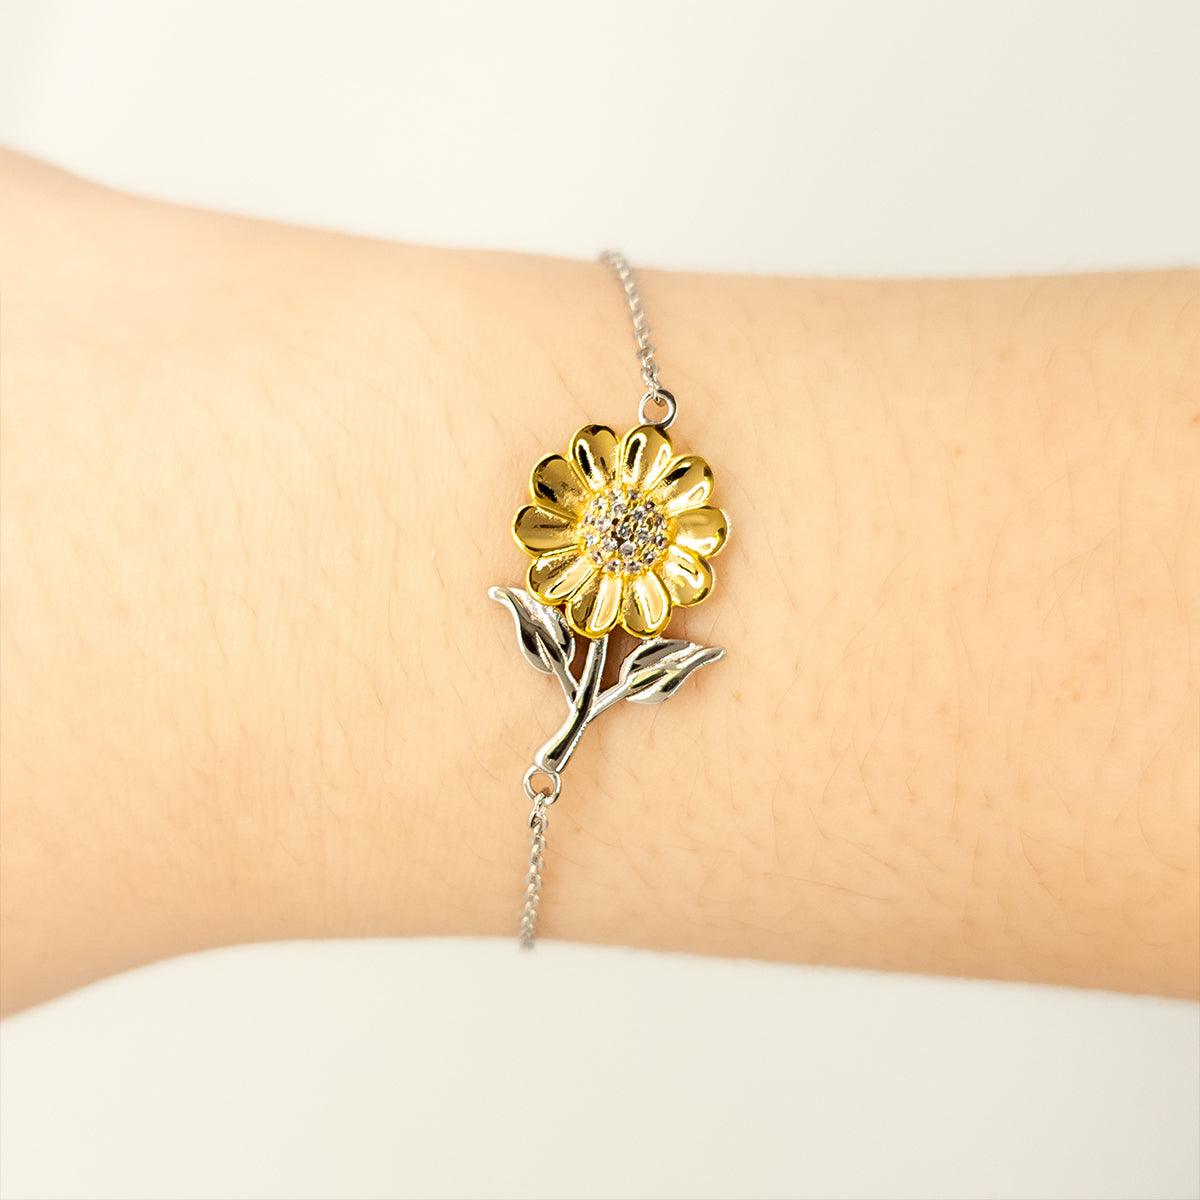 Motivational Son Sunflower Bracelet- I can promise to love you for the rest of my life, Birthday, Christmas Holiday Jewelry Gift - Mallard Moon Gift Shop